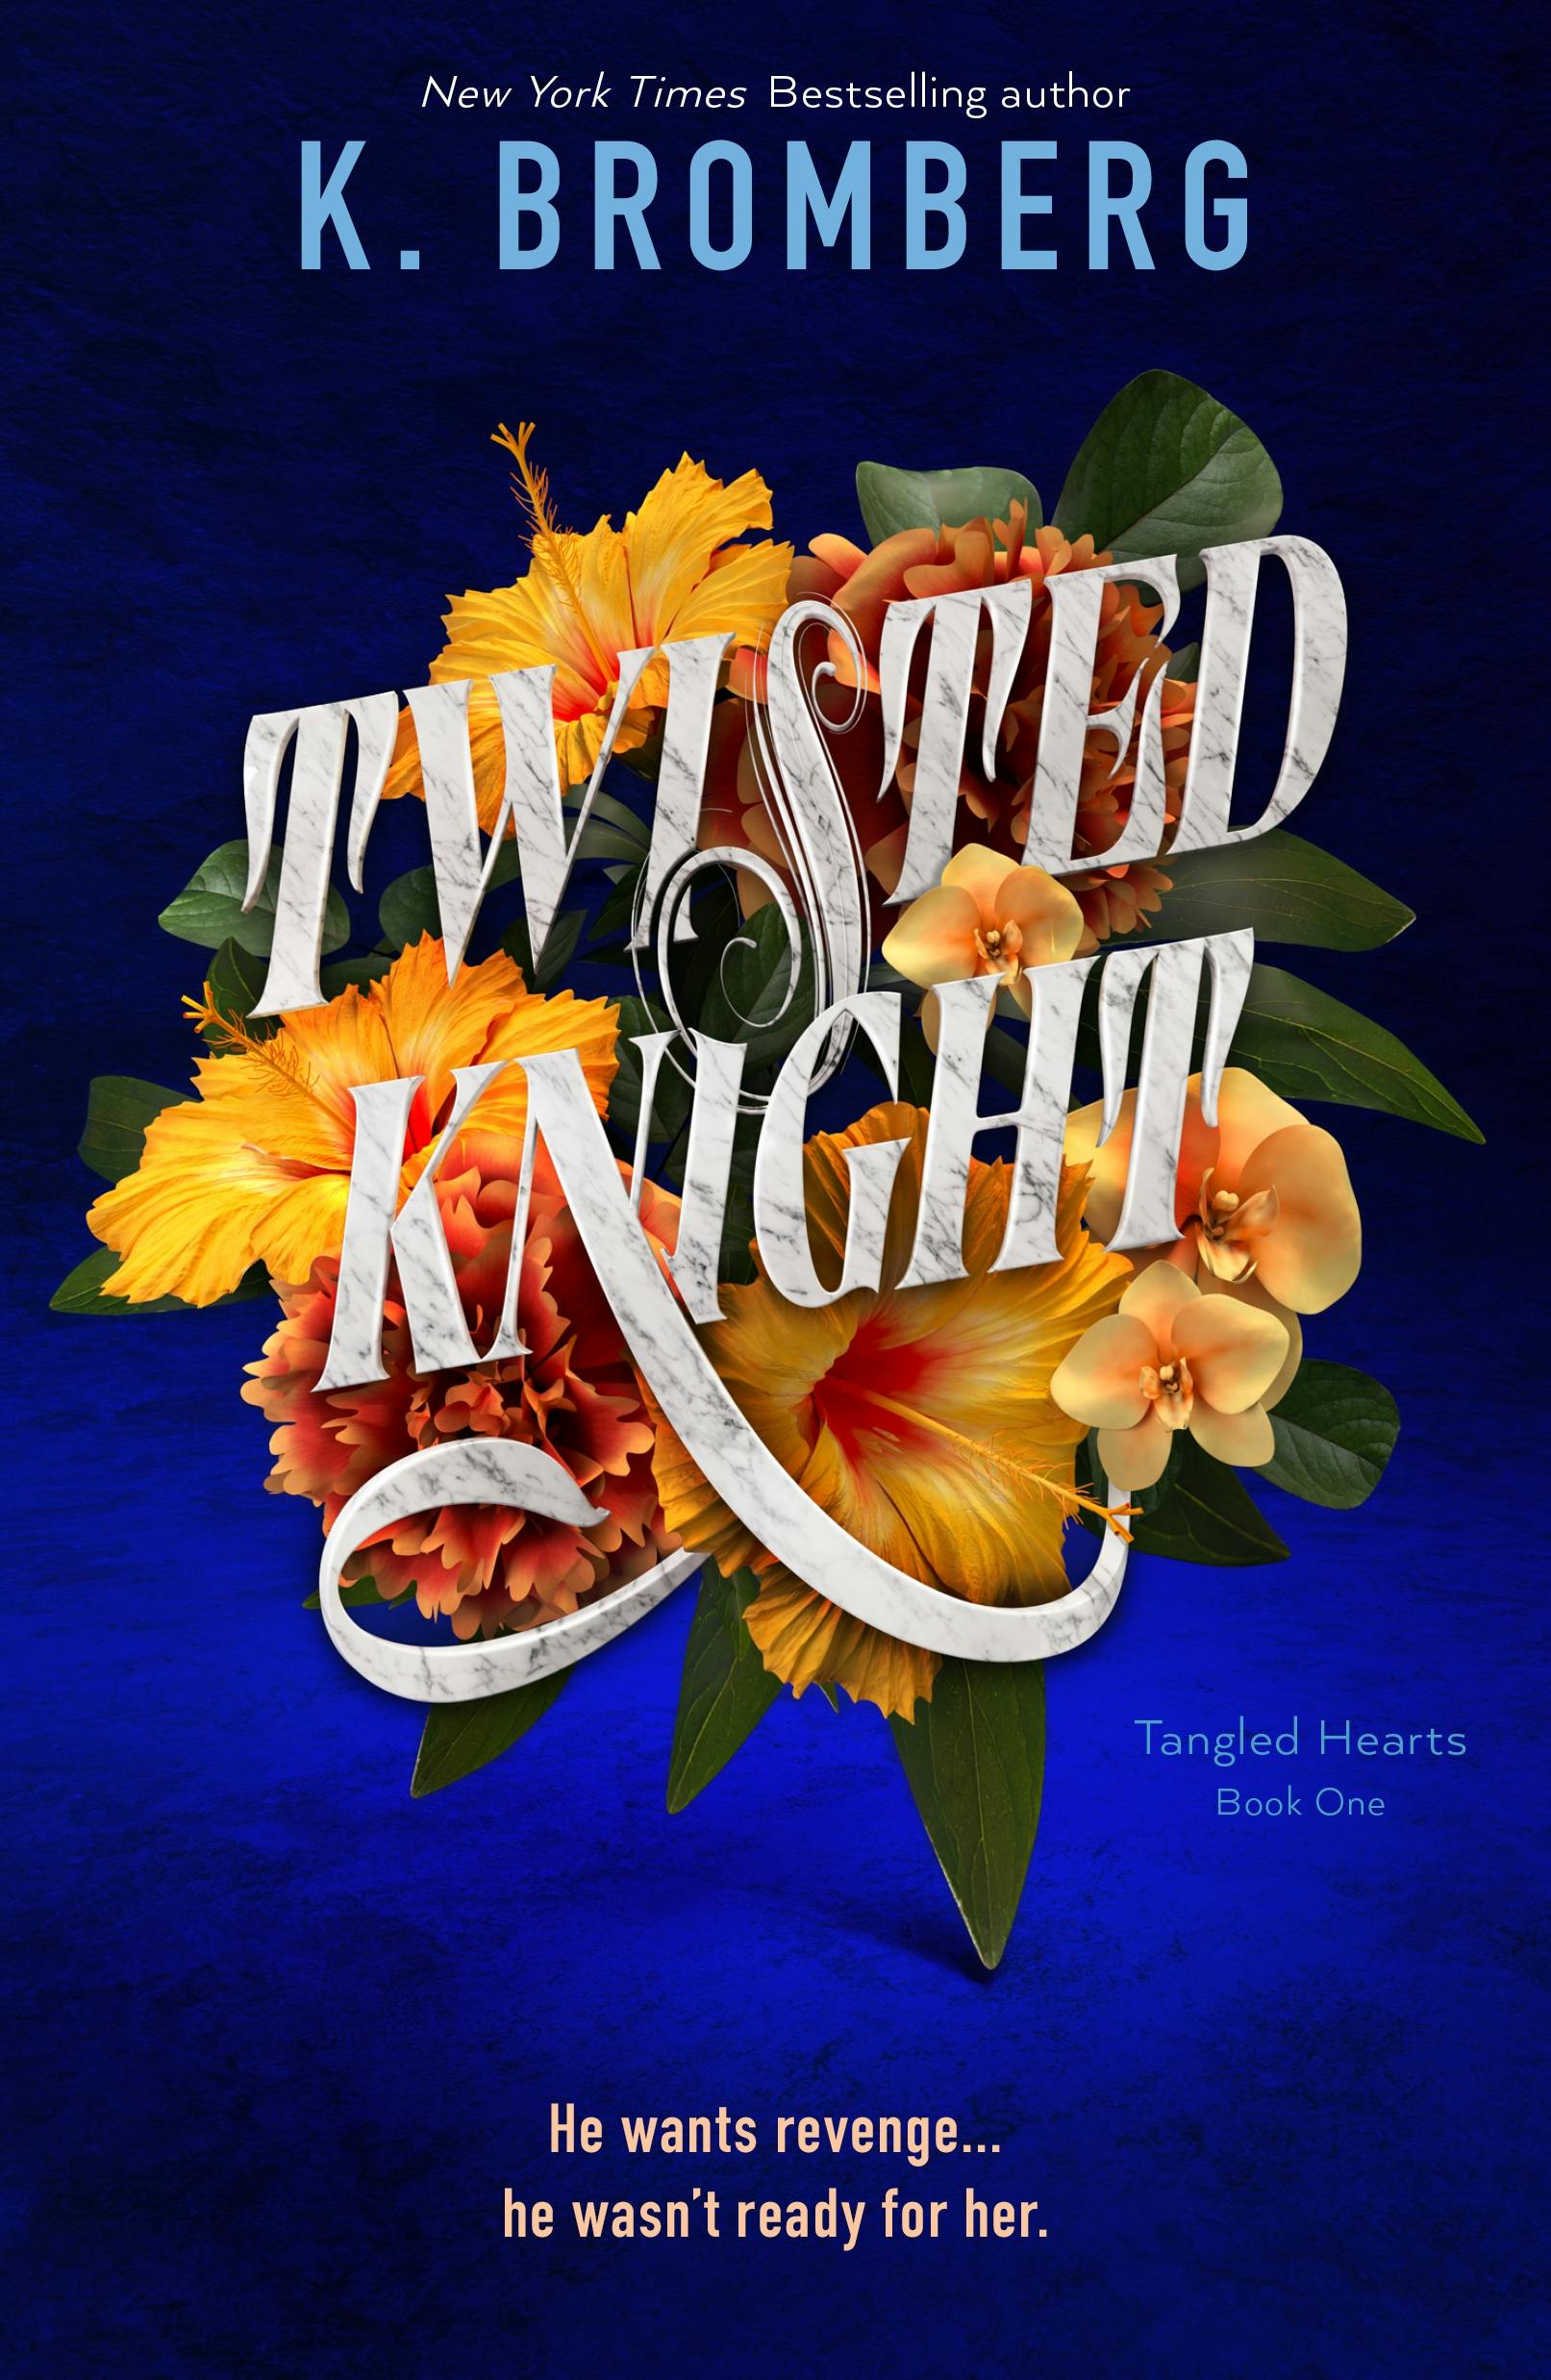 Cover for the book titled as: Twisted Knight